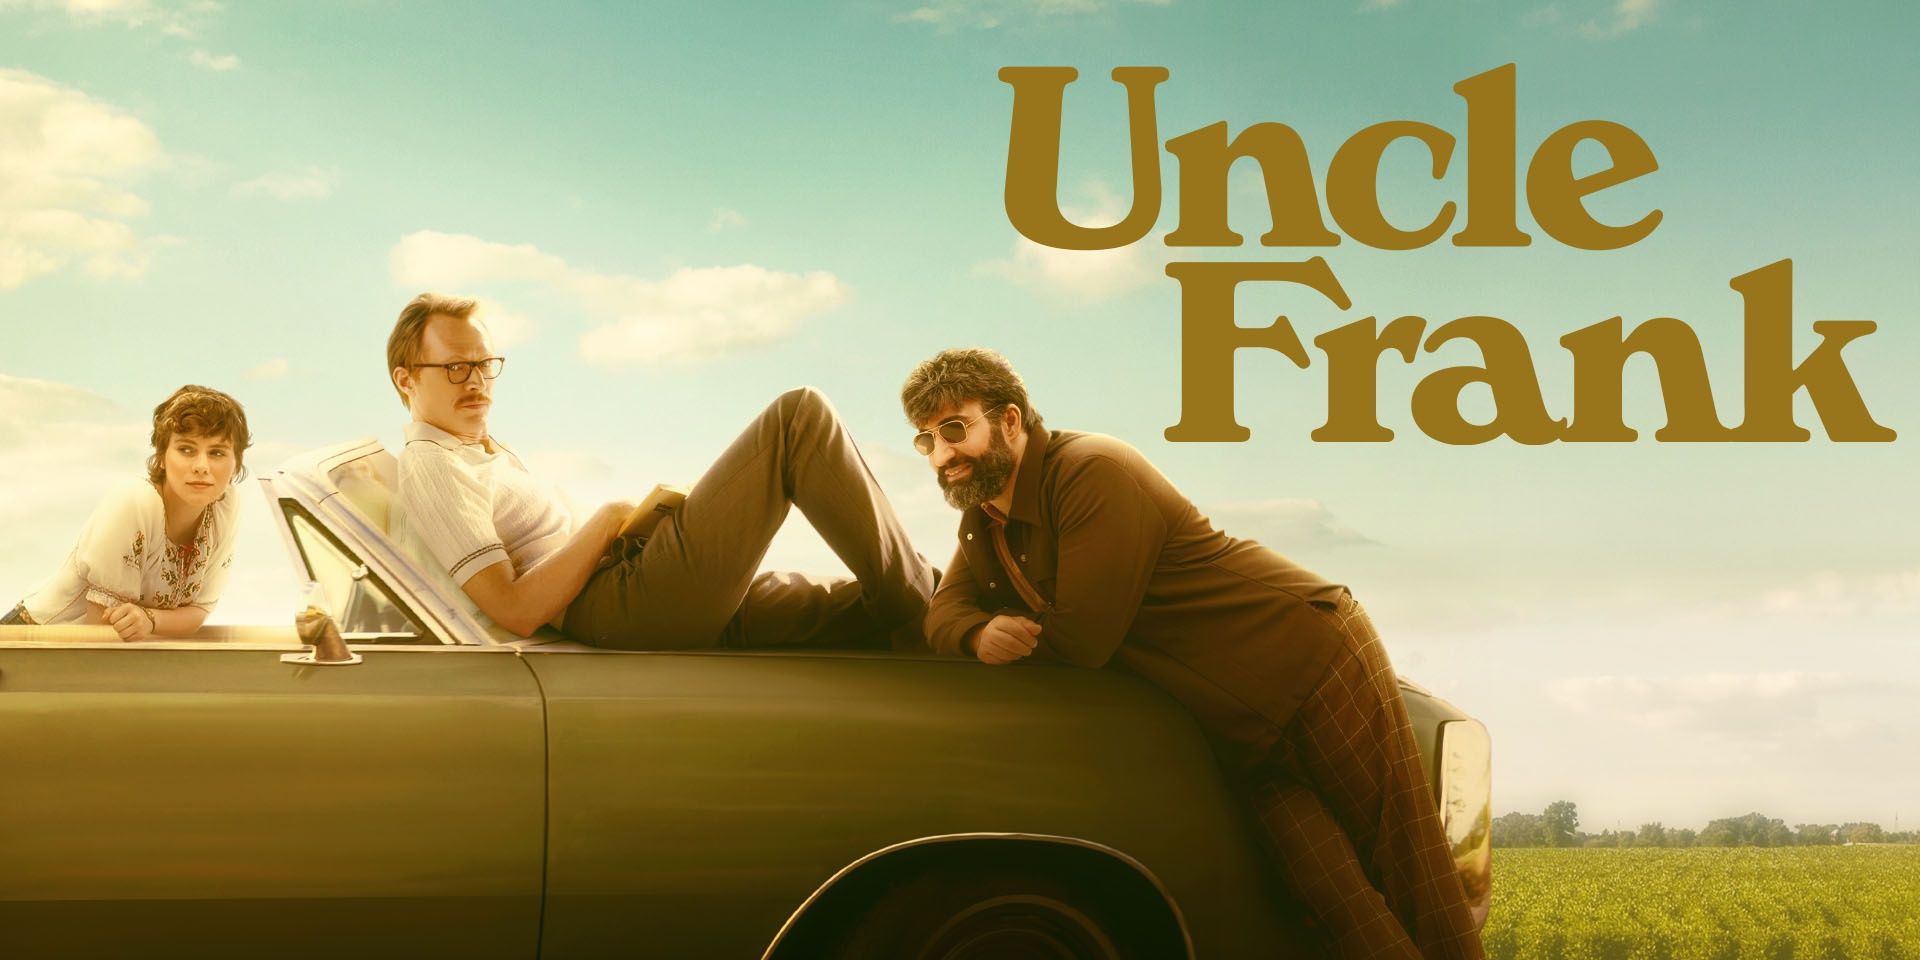 Peter Macdissi, Sophia Lillis, and Paul Bettany (sitting on top of a car) in Uncle Frank